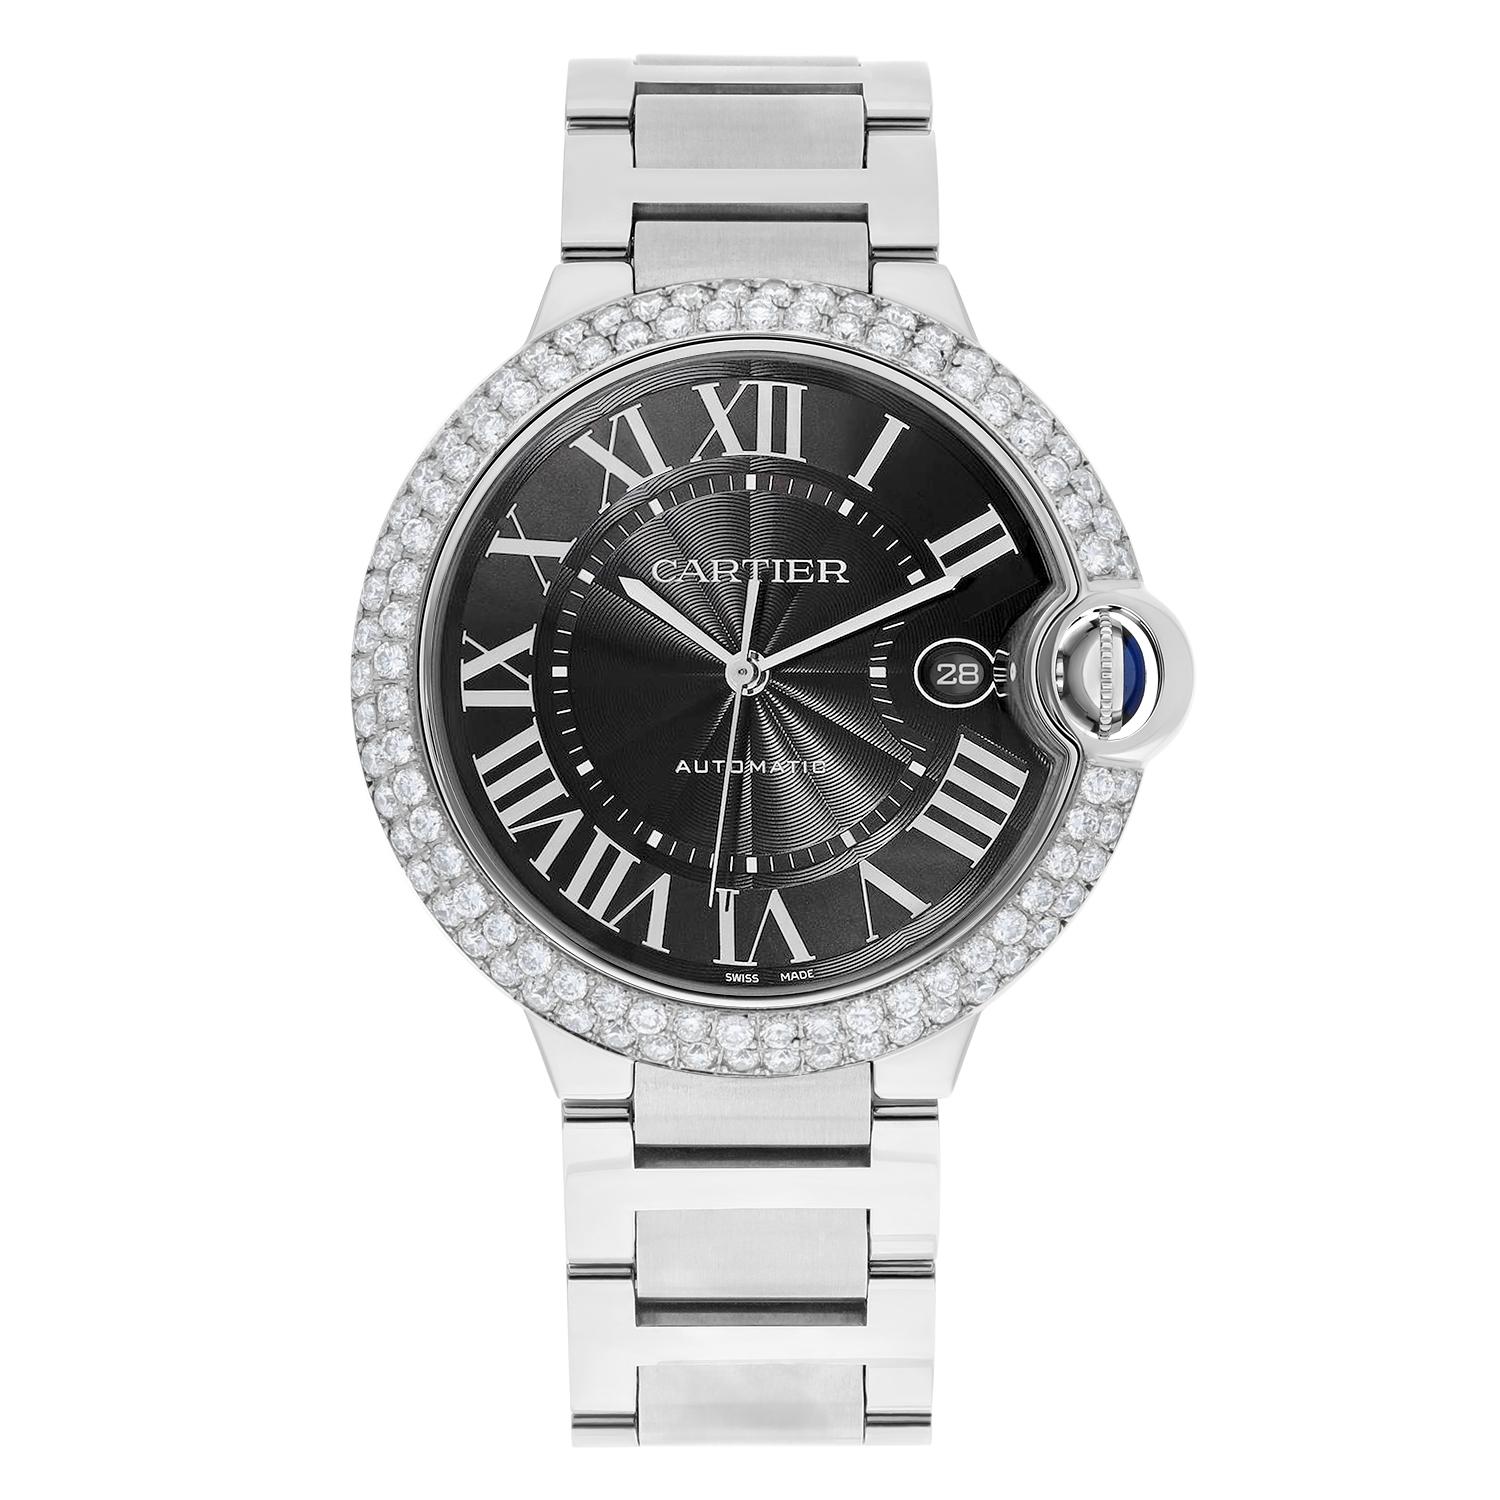 Elevate your style with the Cartier Ballon Bleu wristwatch, a perfect accessory for any occasion. This Swiss-made, luxury timepiece features a sleek stainless steel bracelet and a 40mm round case with custom added 100% natural diamonds, making it